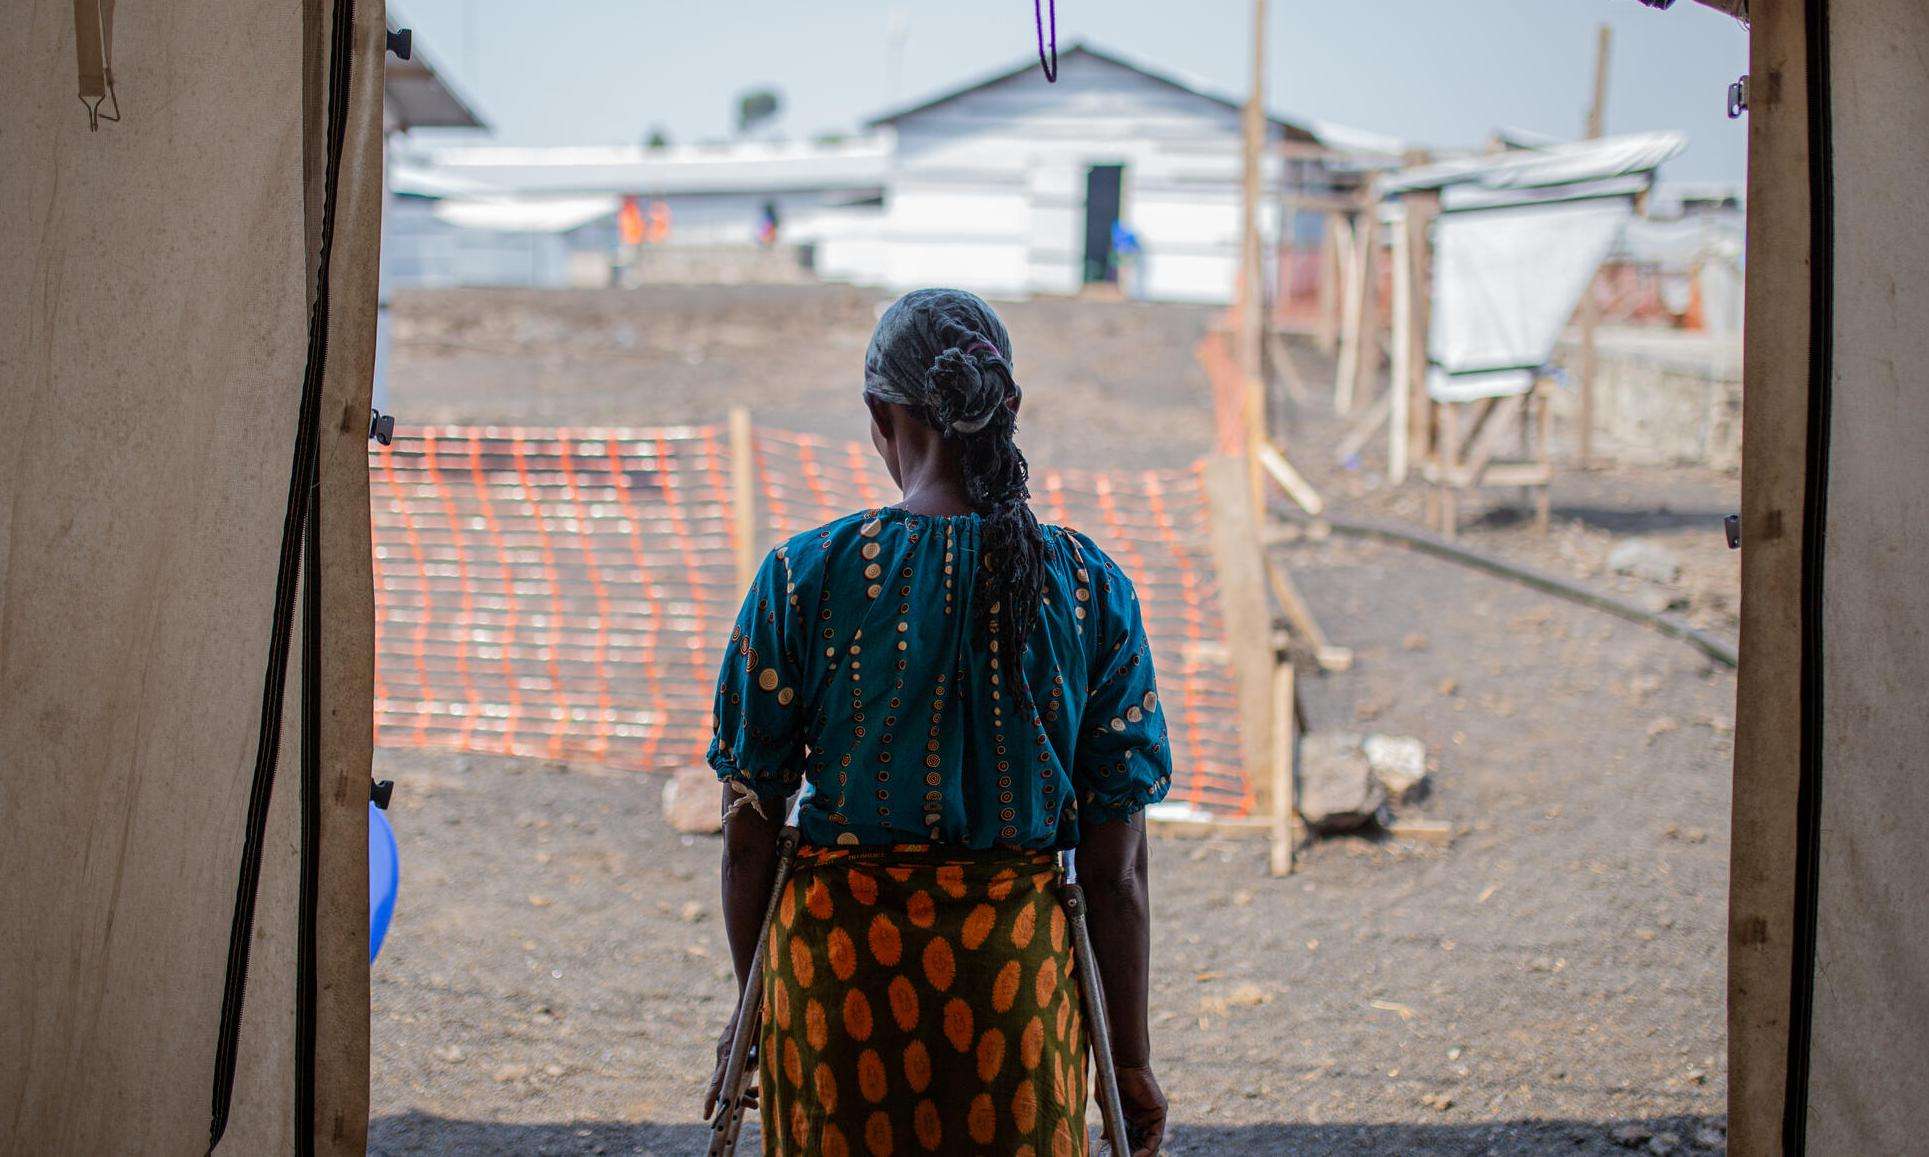 A woman stands in a makeshift tent facing away in a camp for displaced people near Goma, Democratic Republic of Congo.